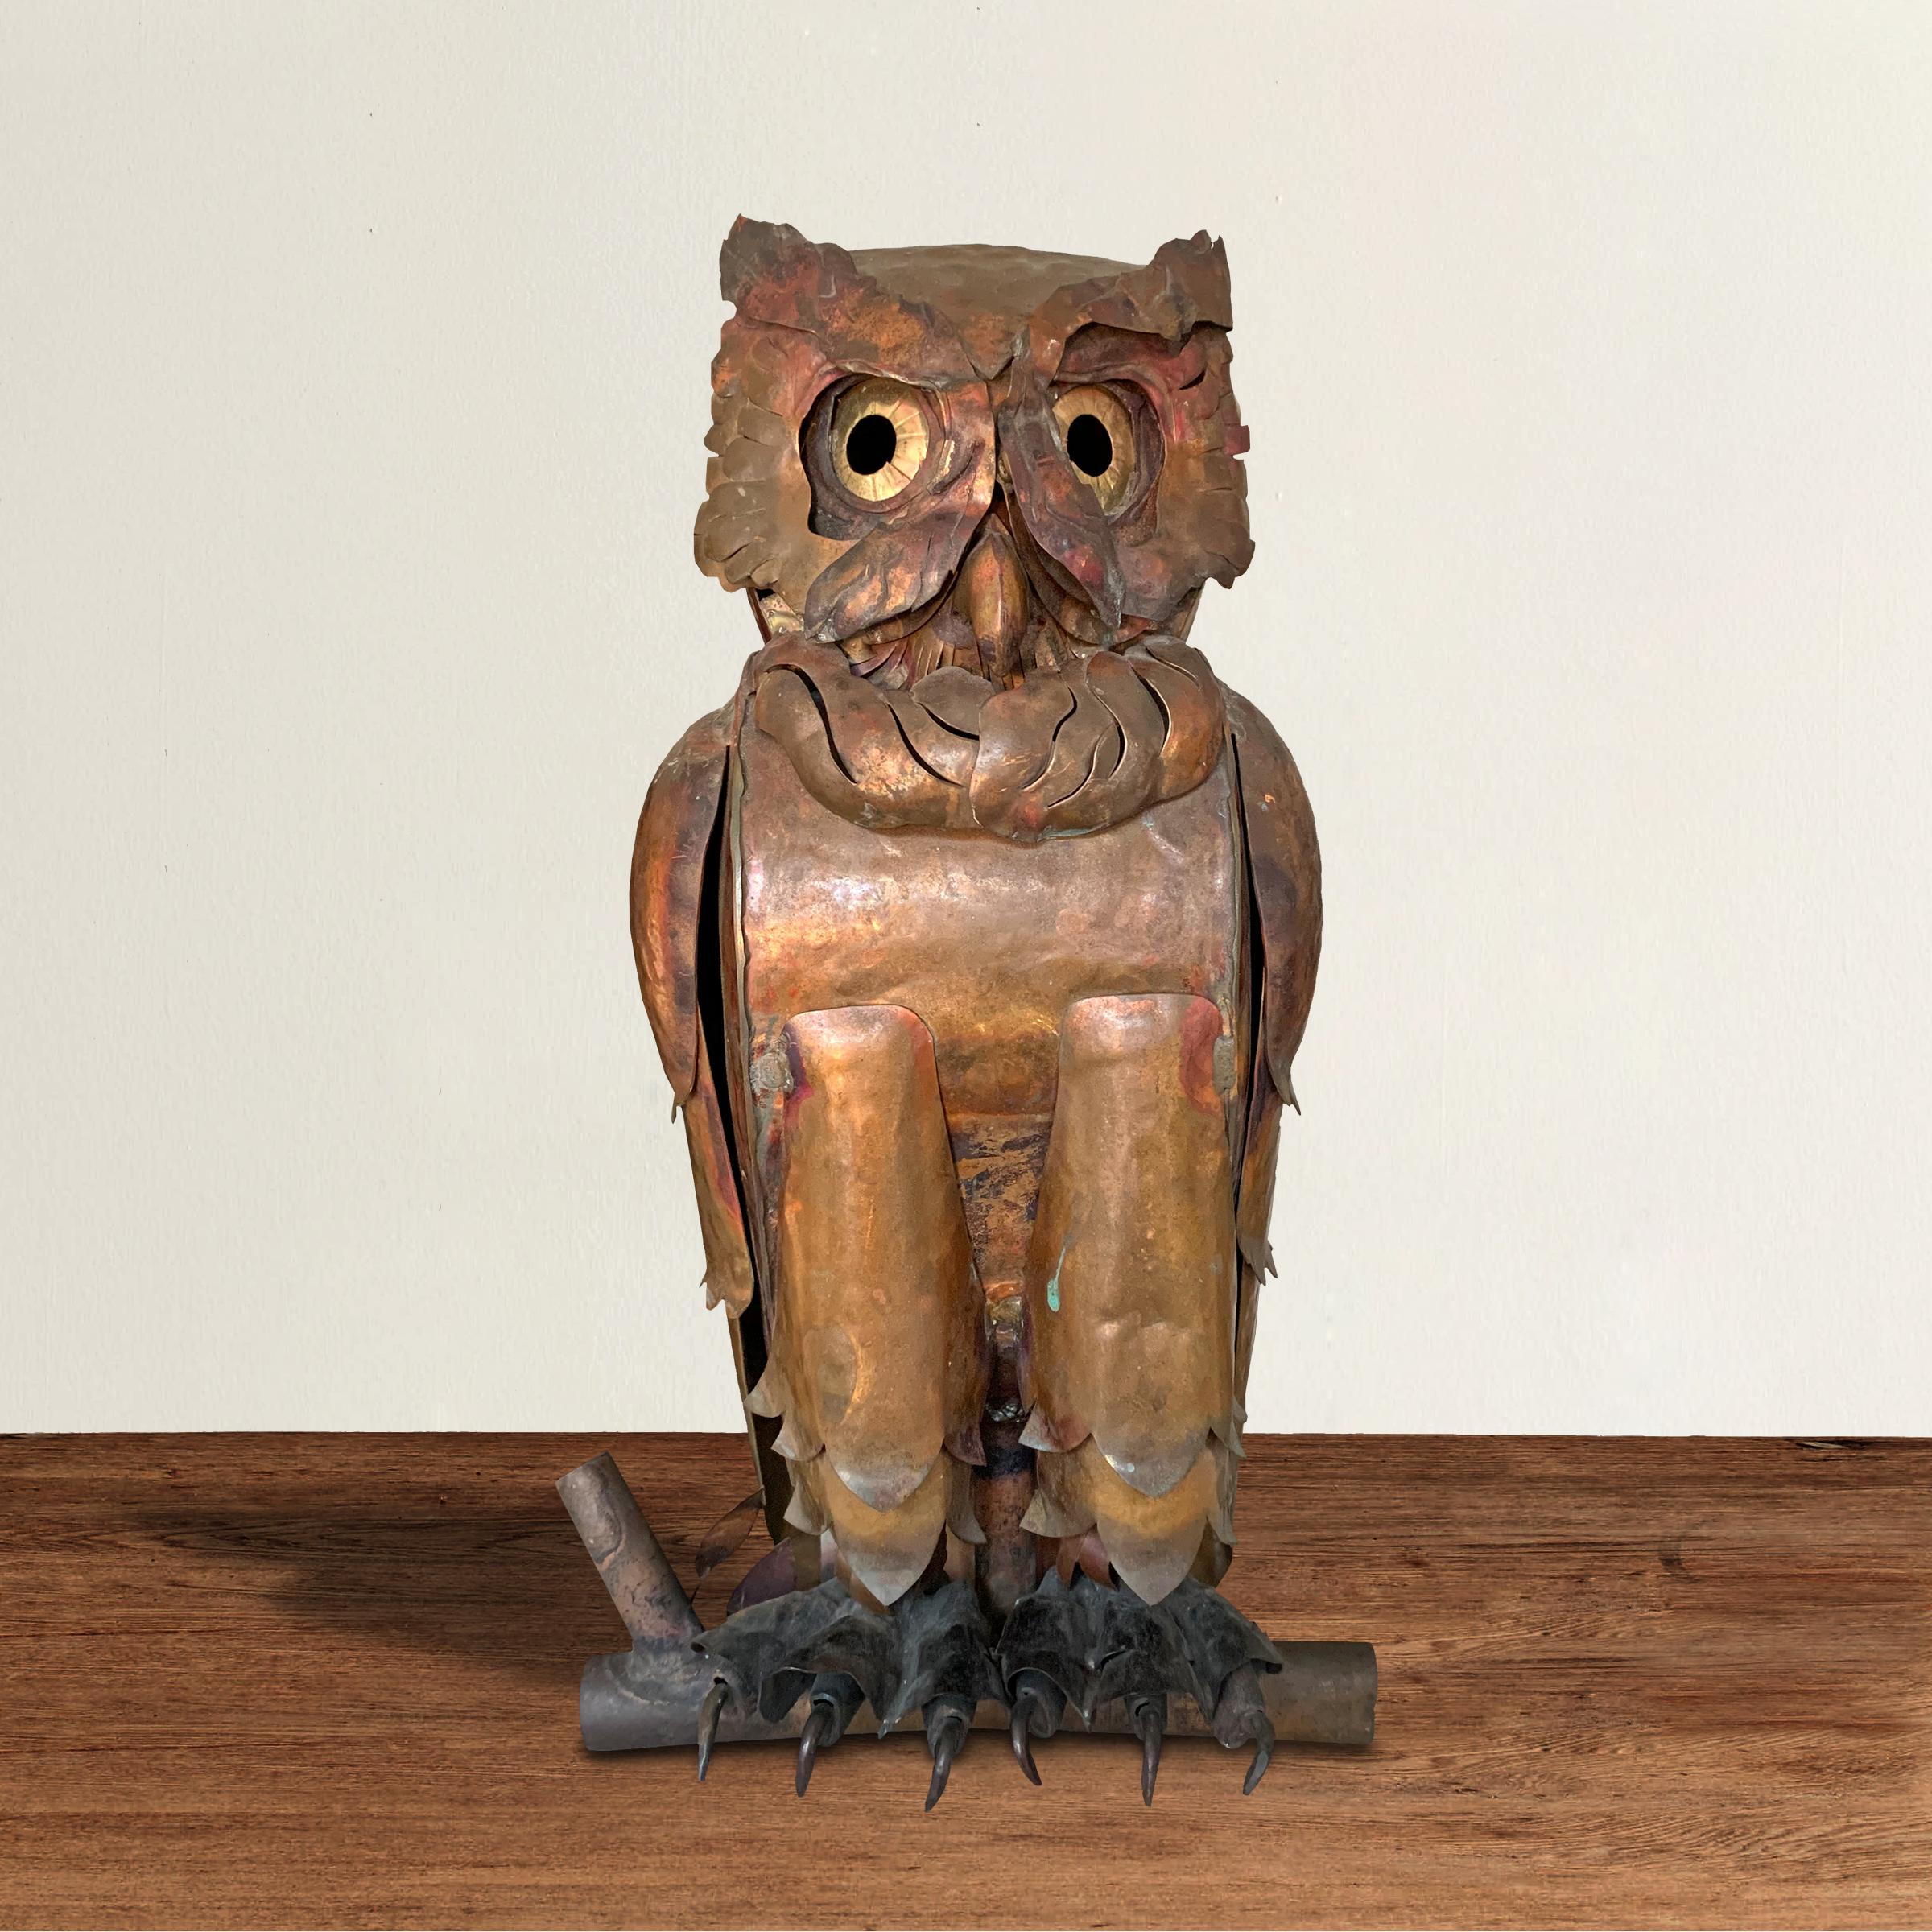 A whimsical and folky handmade copper owl with an expressive face with large brass eyes, copper feathers, and iron talons, resting a copper tube “tree branch.” It’s possible this was made as part of a weather vane.